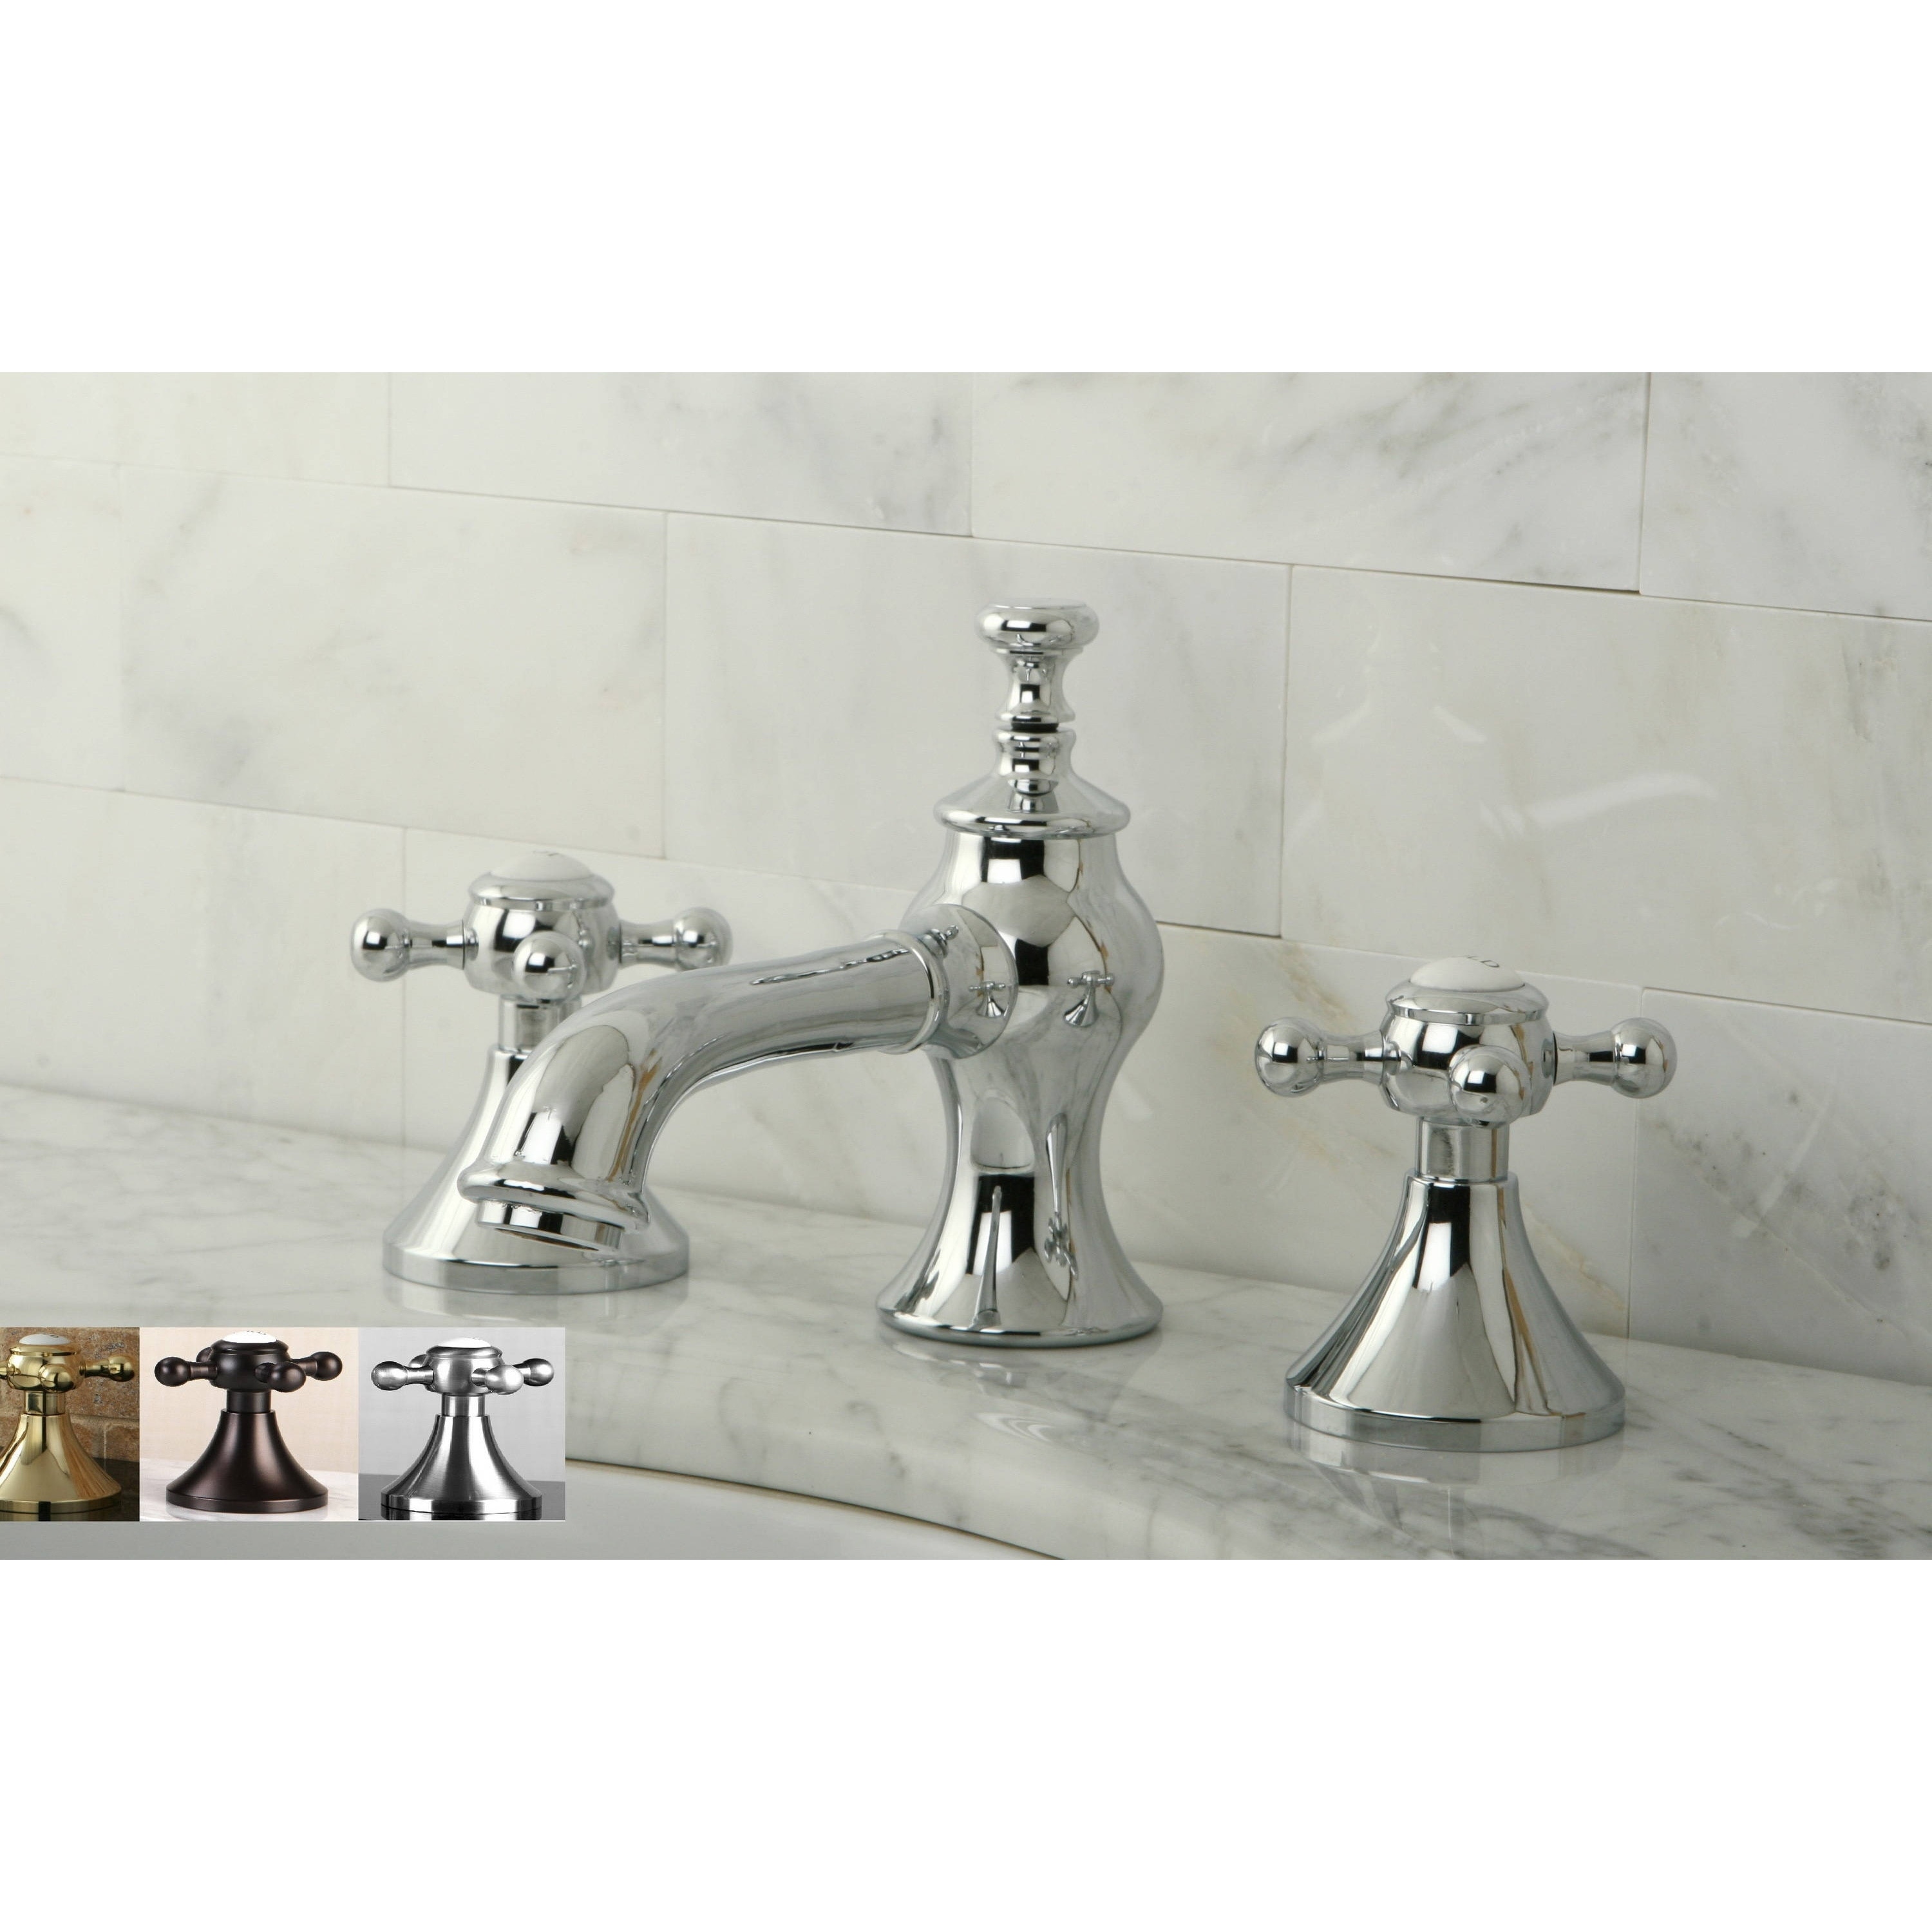 Vintage Cross Widespread Bathroom Faucet Overstock 13348772 Polished Chrome